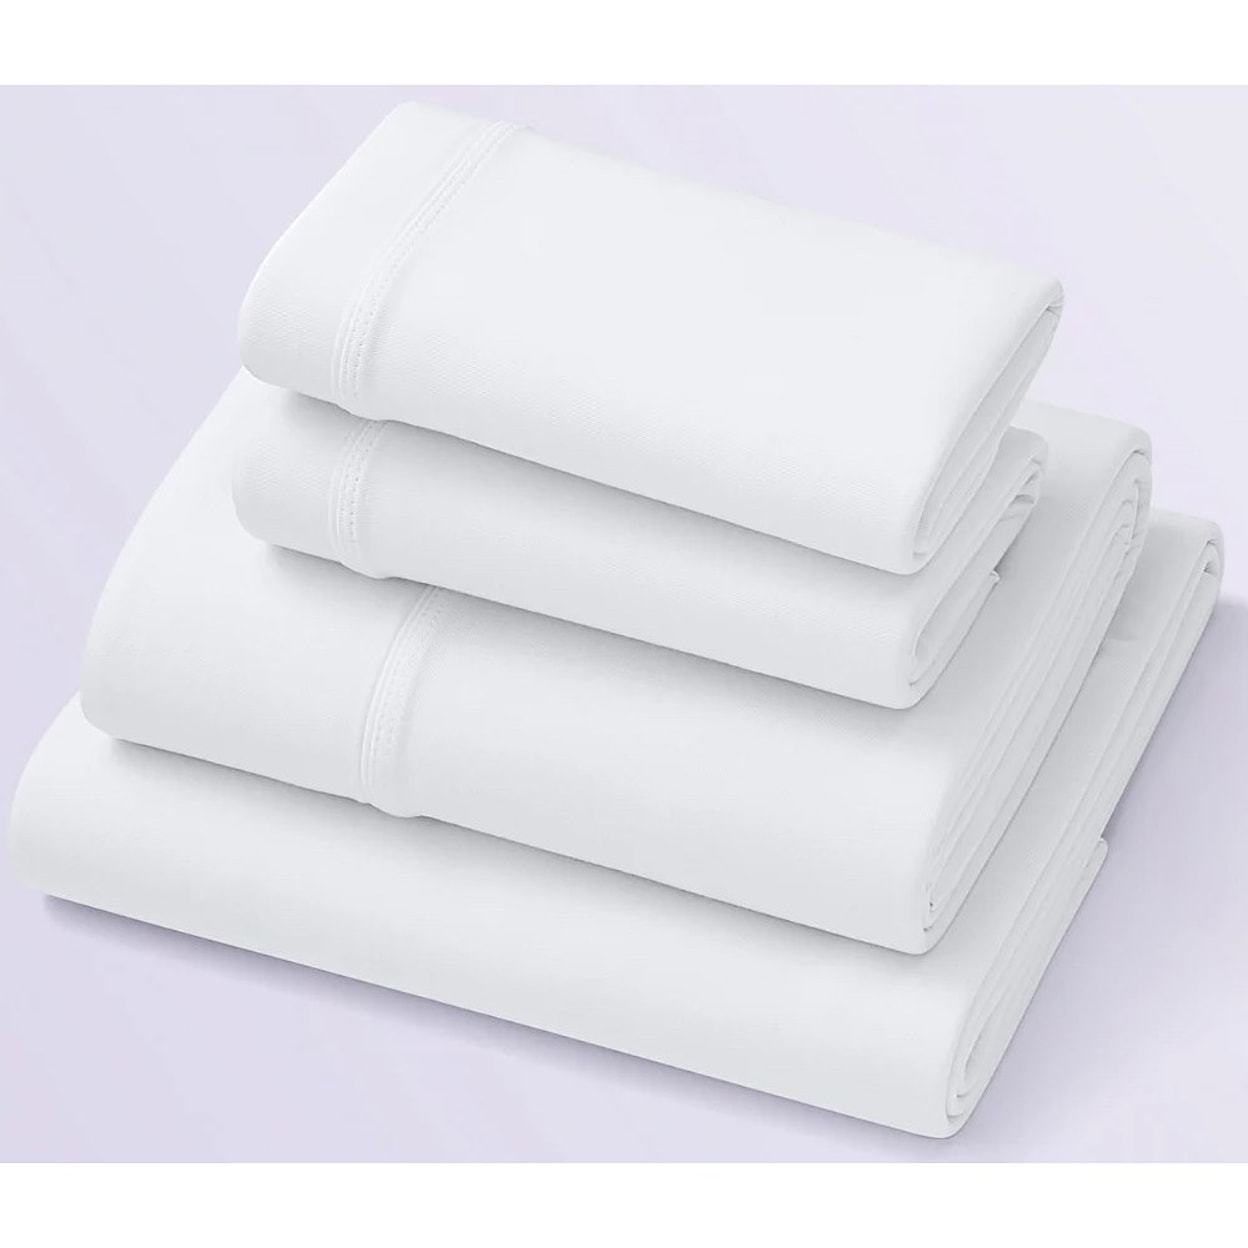 Purple Purple SoftStretch Sheets Queen SoftStretch Sheets Set